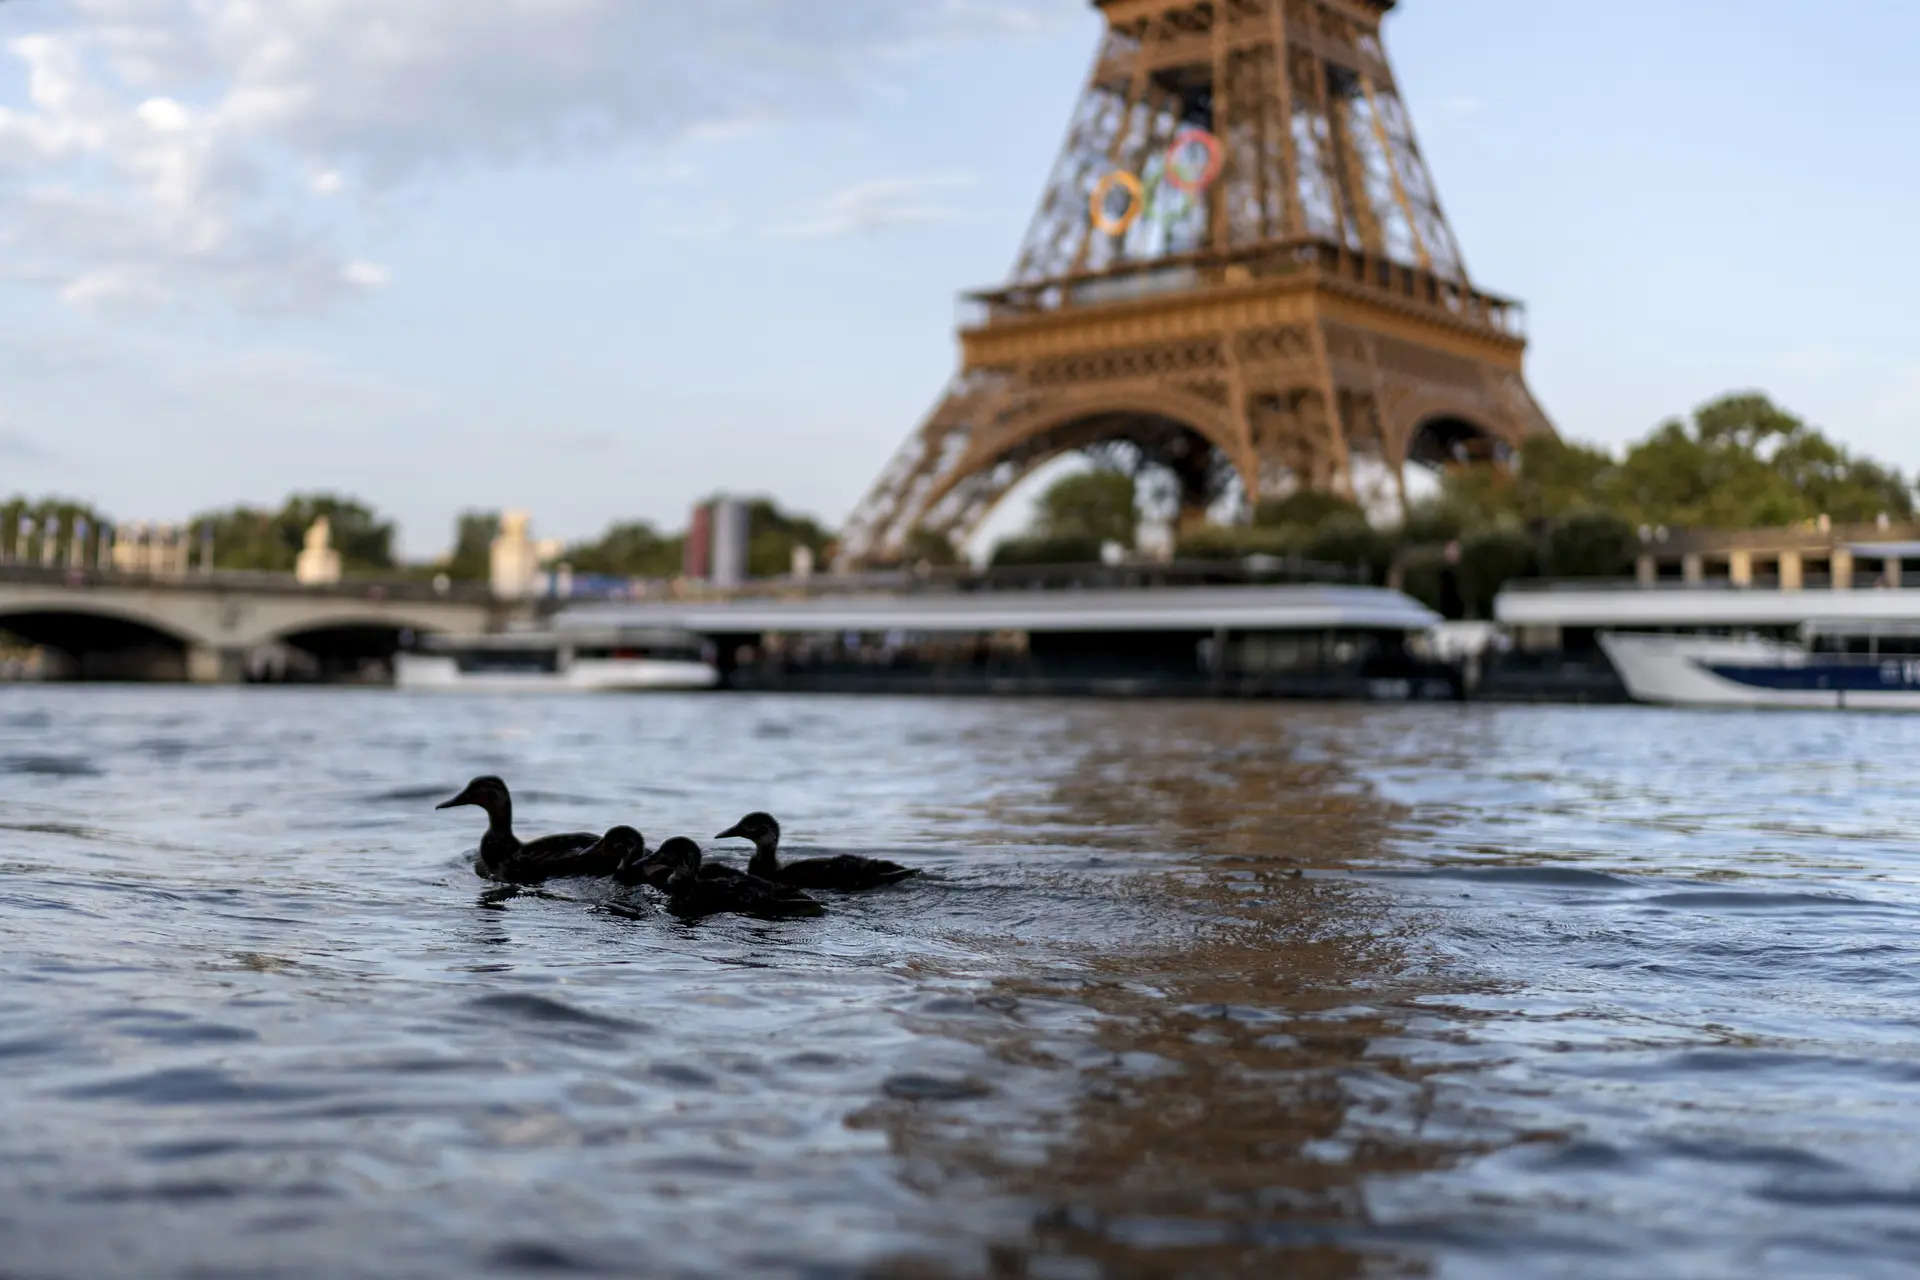 Olympic triathletes will swim in Paris' Seine River after days of concerns about water quality 